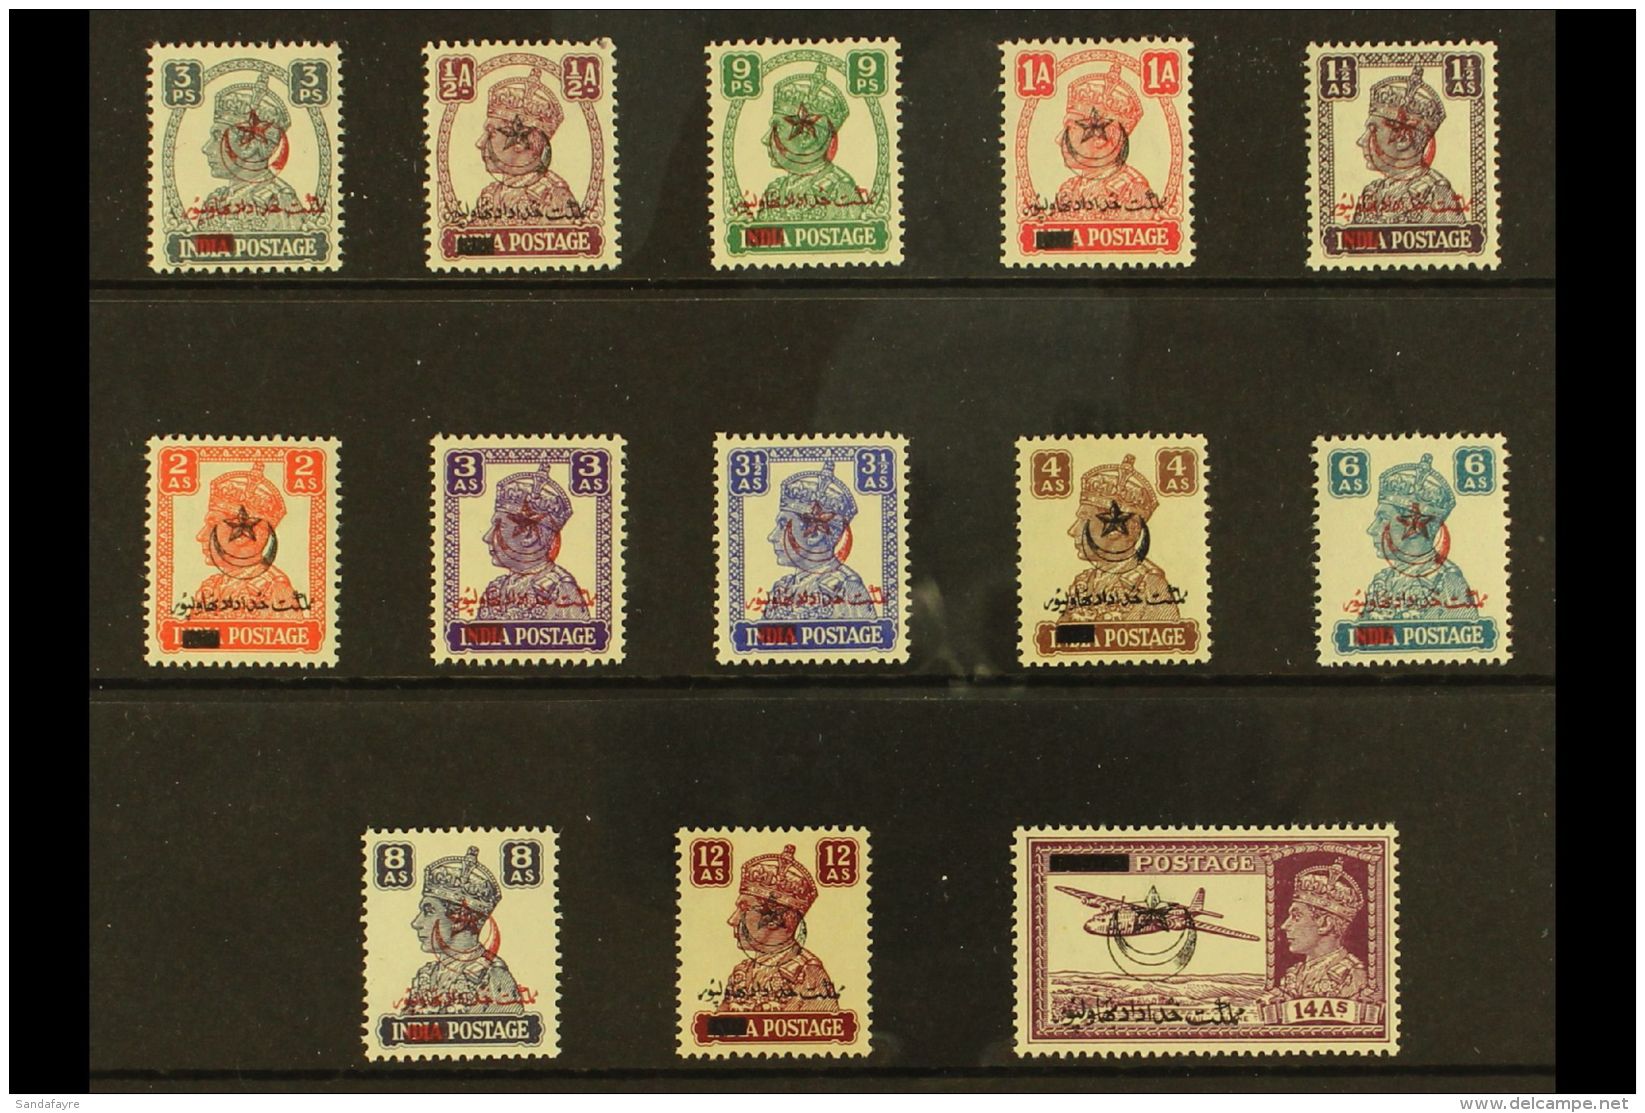 BAHAWALPUR 1947 Star And Crescent Ovpt Set To 14a Complete, SG 1/13, Very Fine And Fresh Mint. Elusive Group. (13... - Bahawalpur